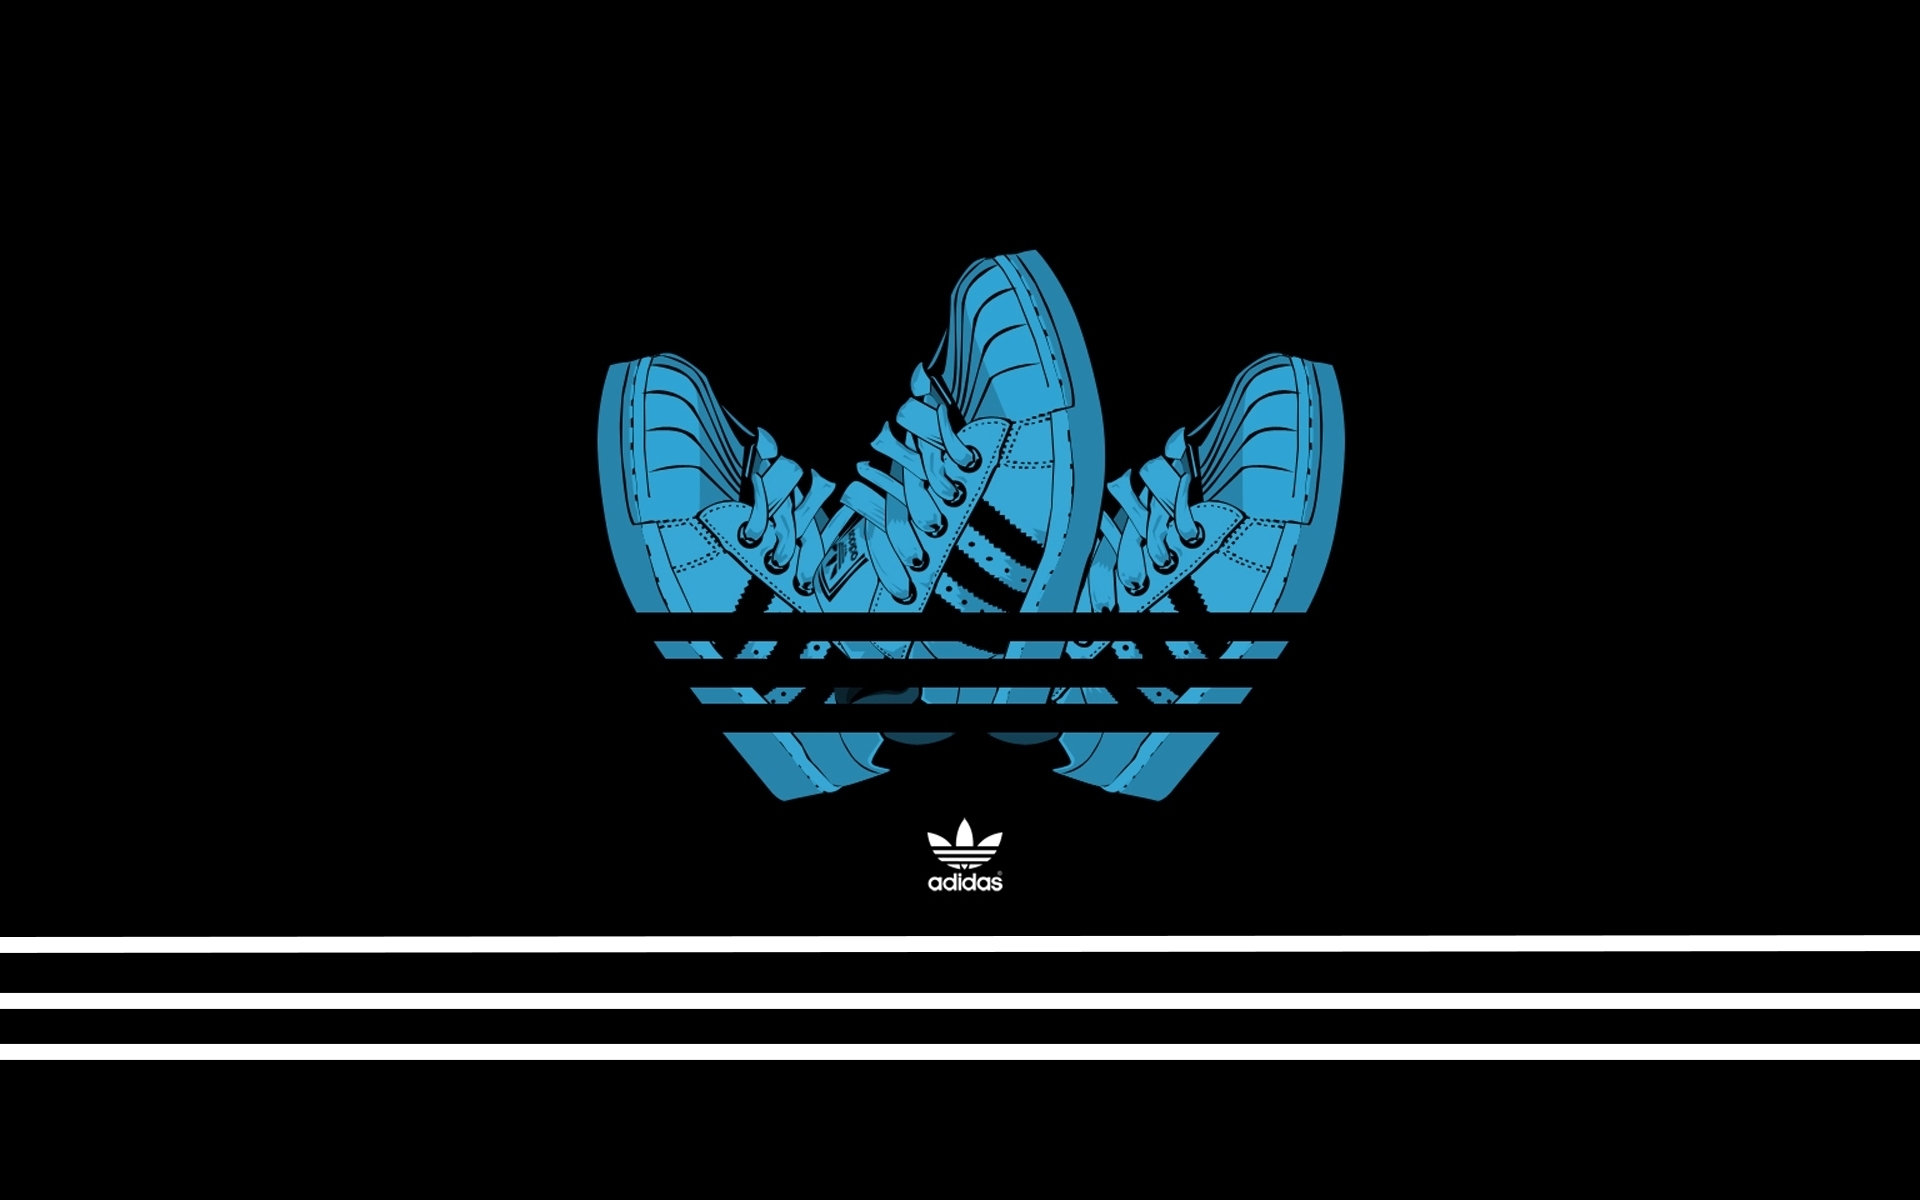 adidas logo 2012 wallpapers and images  wallpapers, pictures, photos